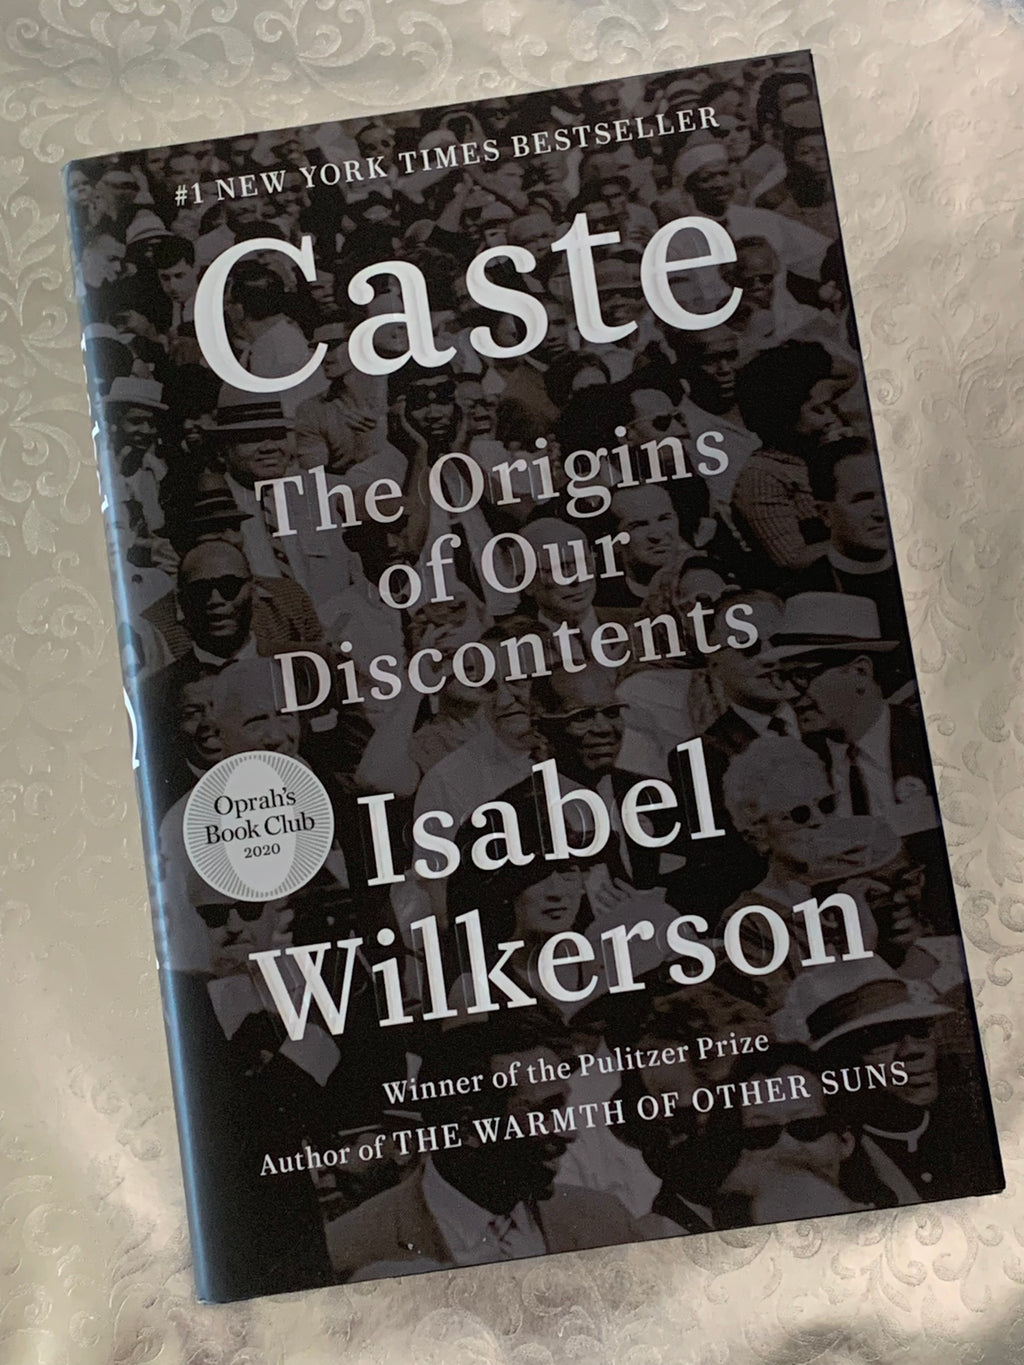 Caste: The Origins of Our Discontents- By Isabel Wilkerson